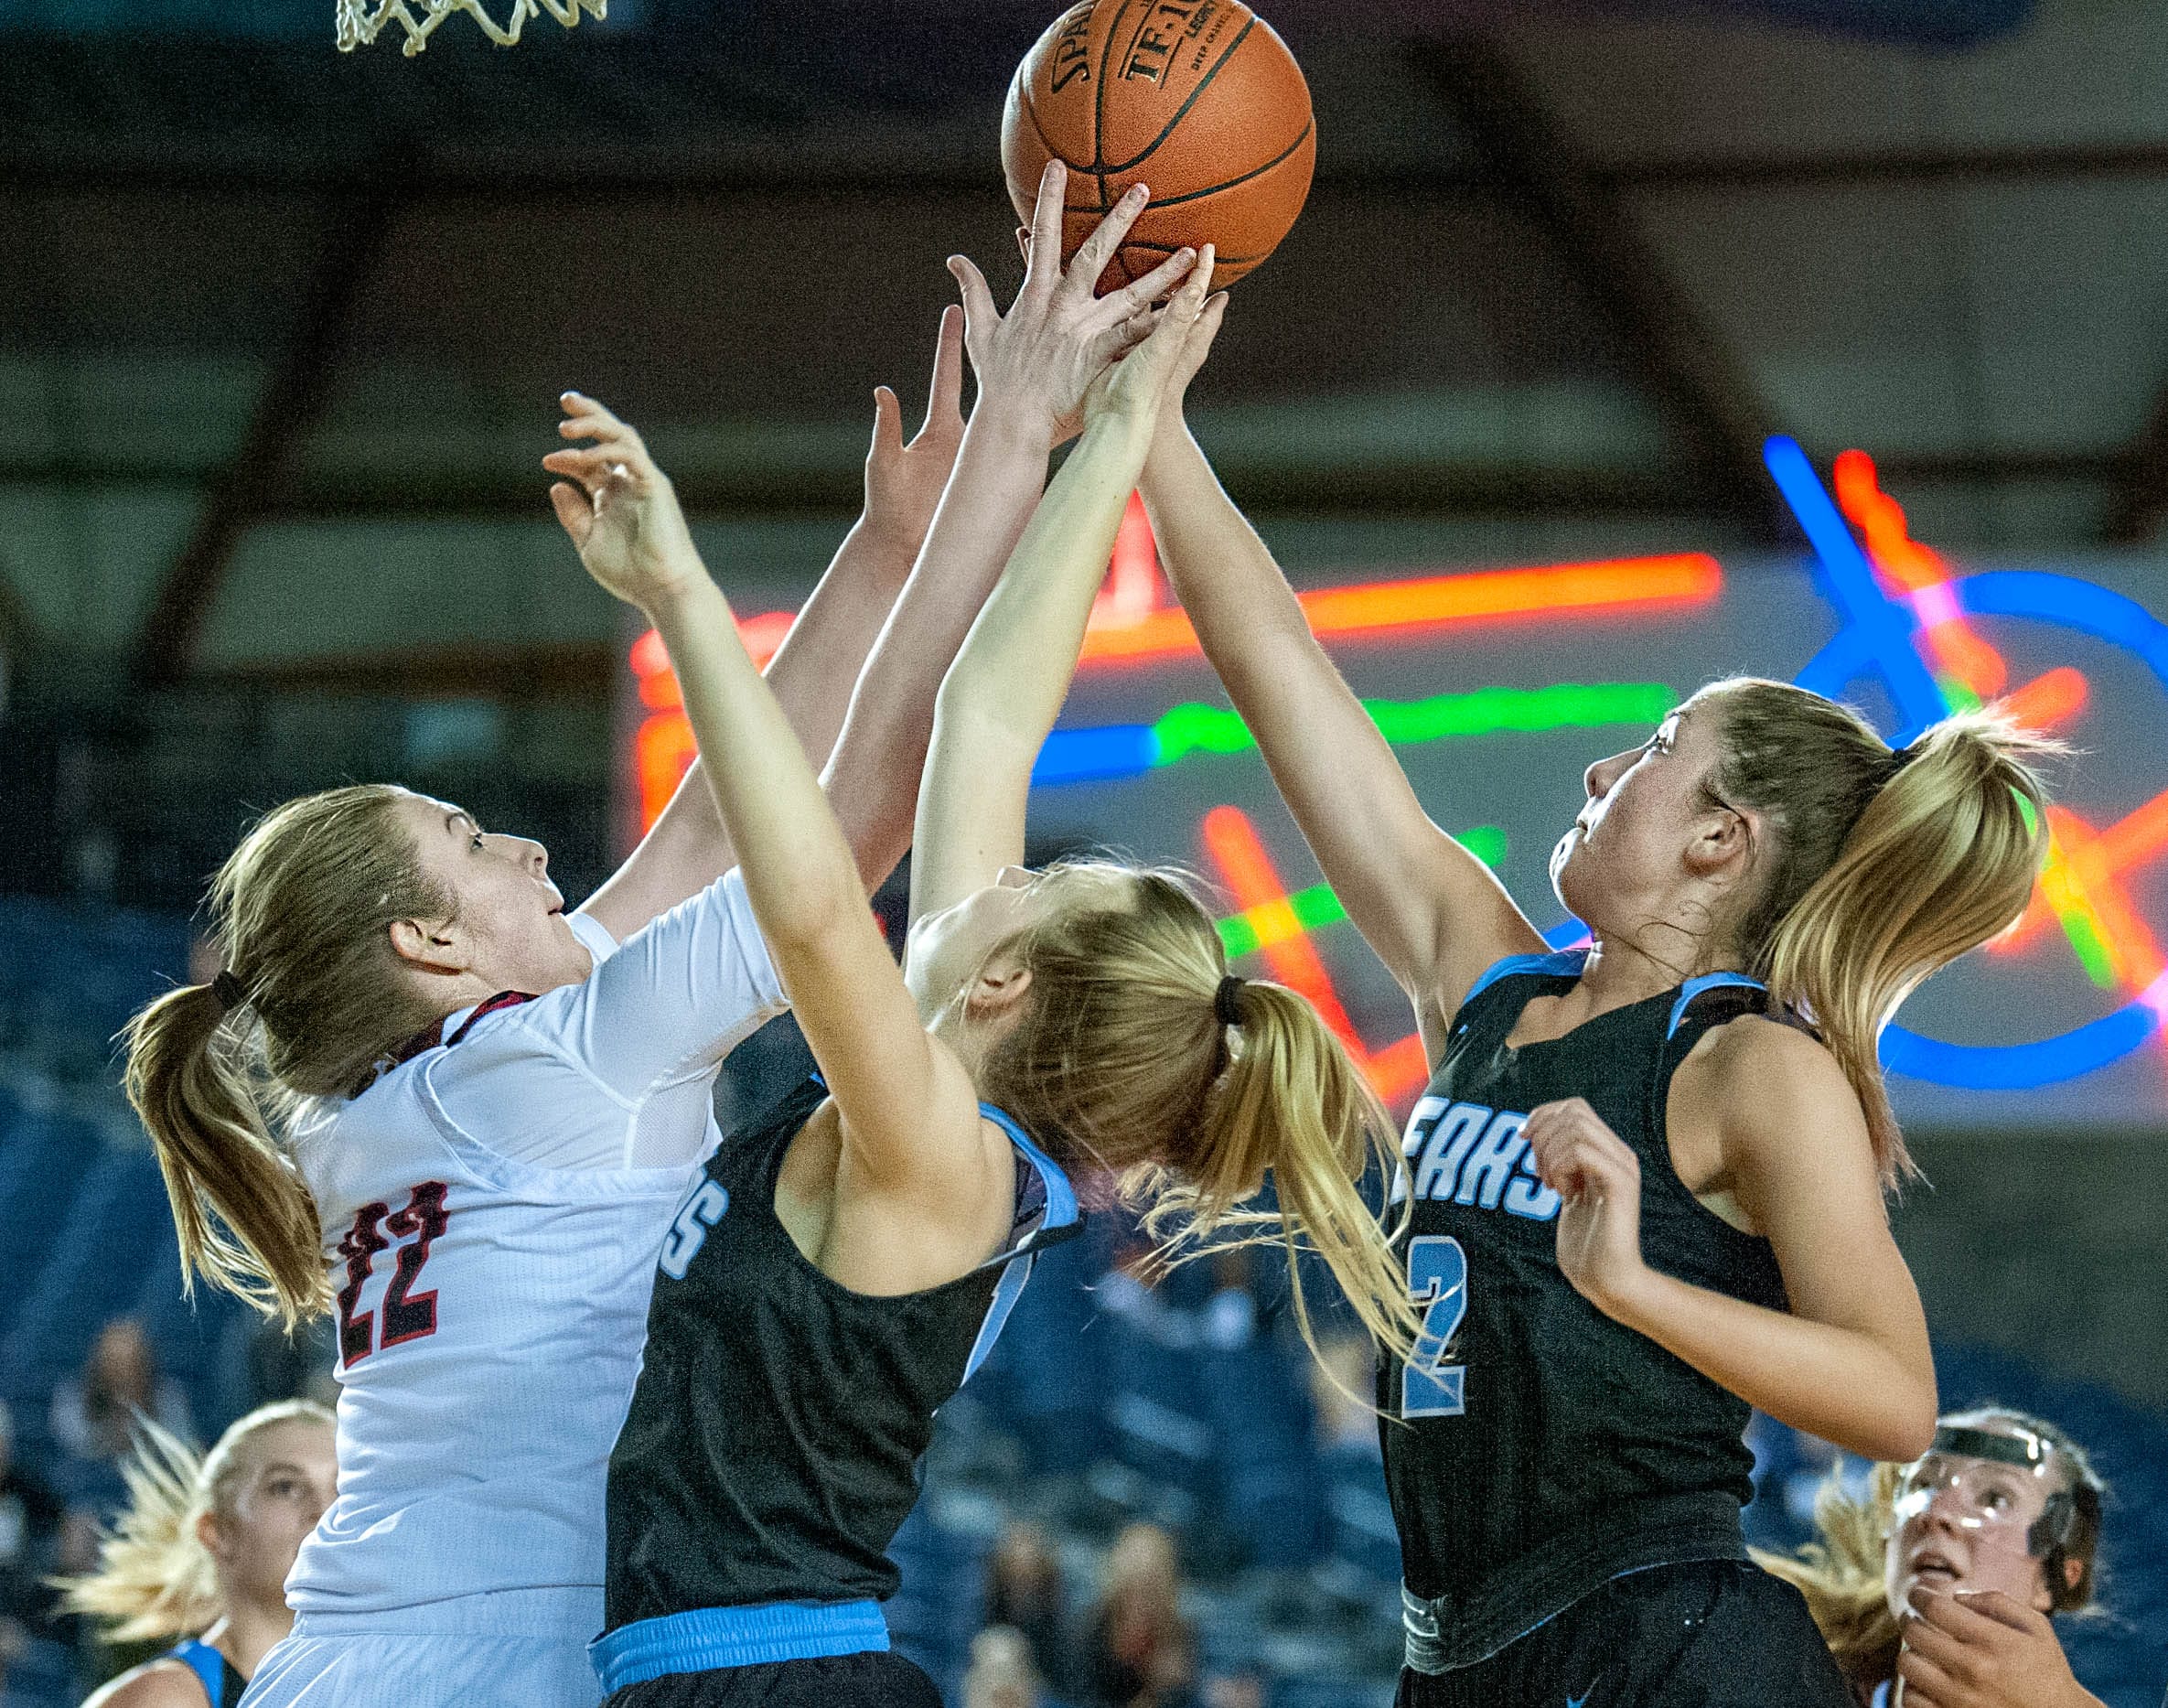 Union's Mackenzie Lewis fights for a rebound with Central Valley's Anika Chalich, center, and Michael Pitts, right. The Titans lost 61-53 in the 4A State semifinal Friday at the Tacoma Dome.